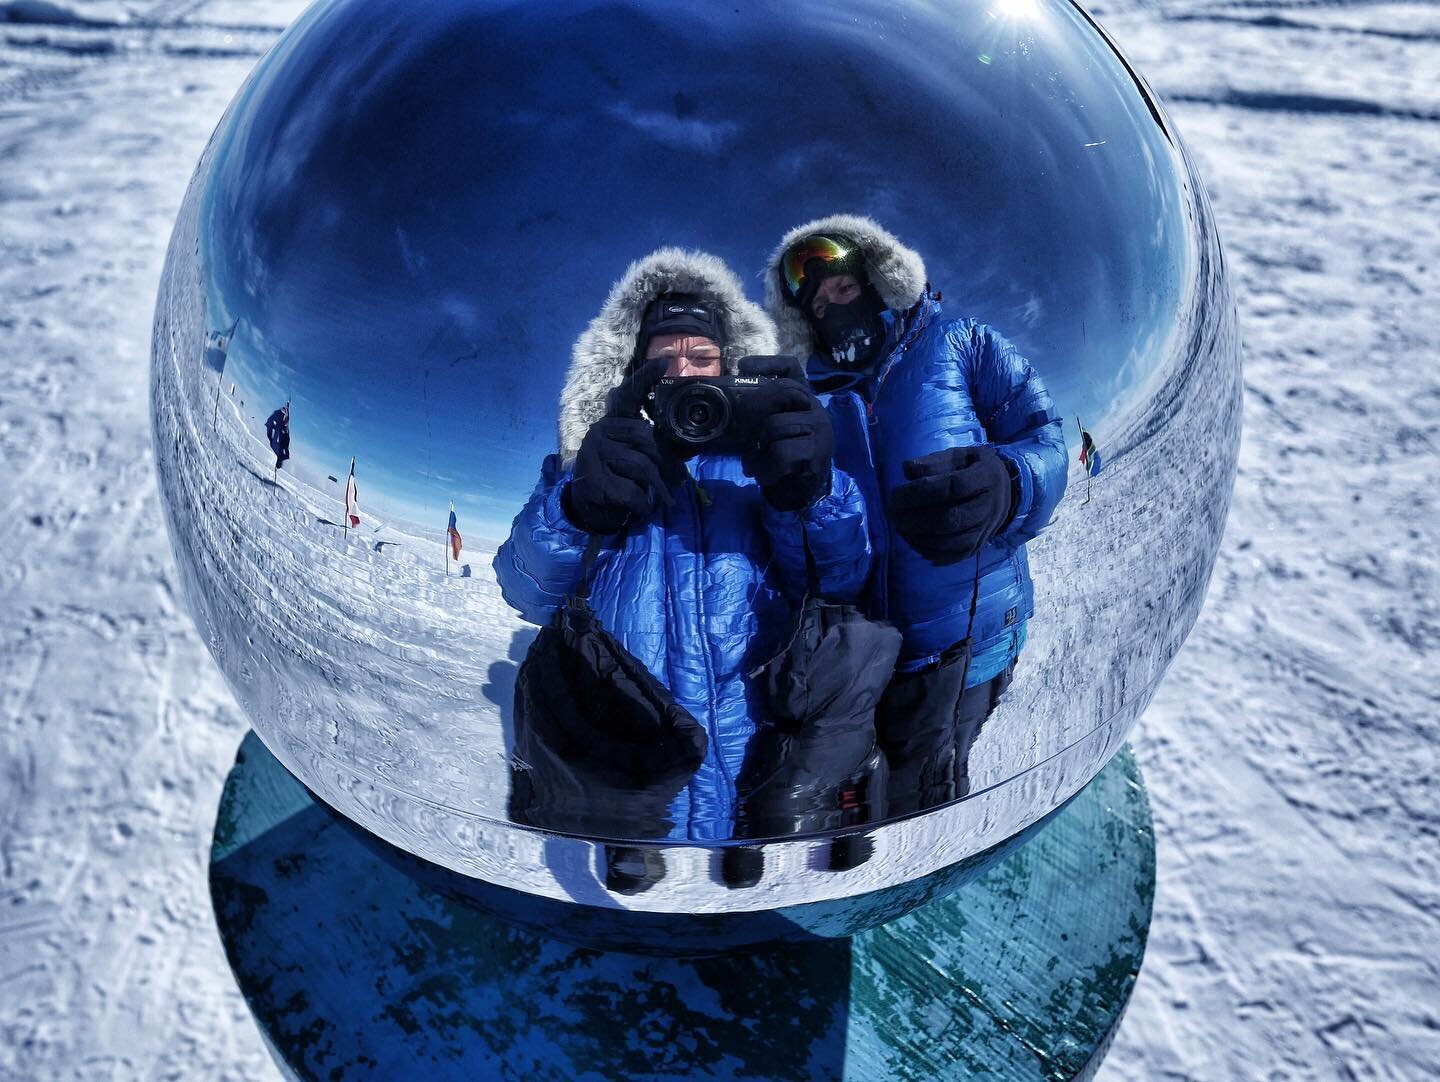 &quot;Risk is an essential need of the soul. The absence of risk produces a kind of boredom which paralyses in a different way from fear, but almost as much.&quot;
&ndash; Simone Weil

South Pole, halfway through the Scott Expedition. December 2013. 